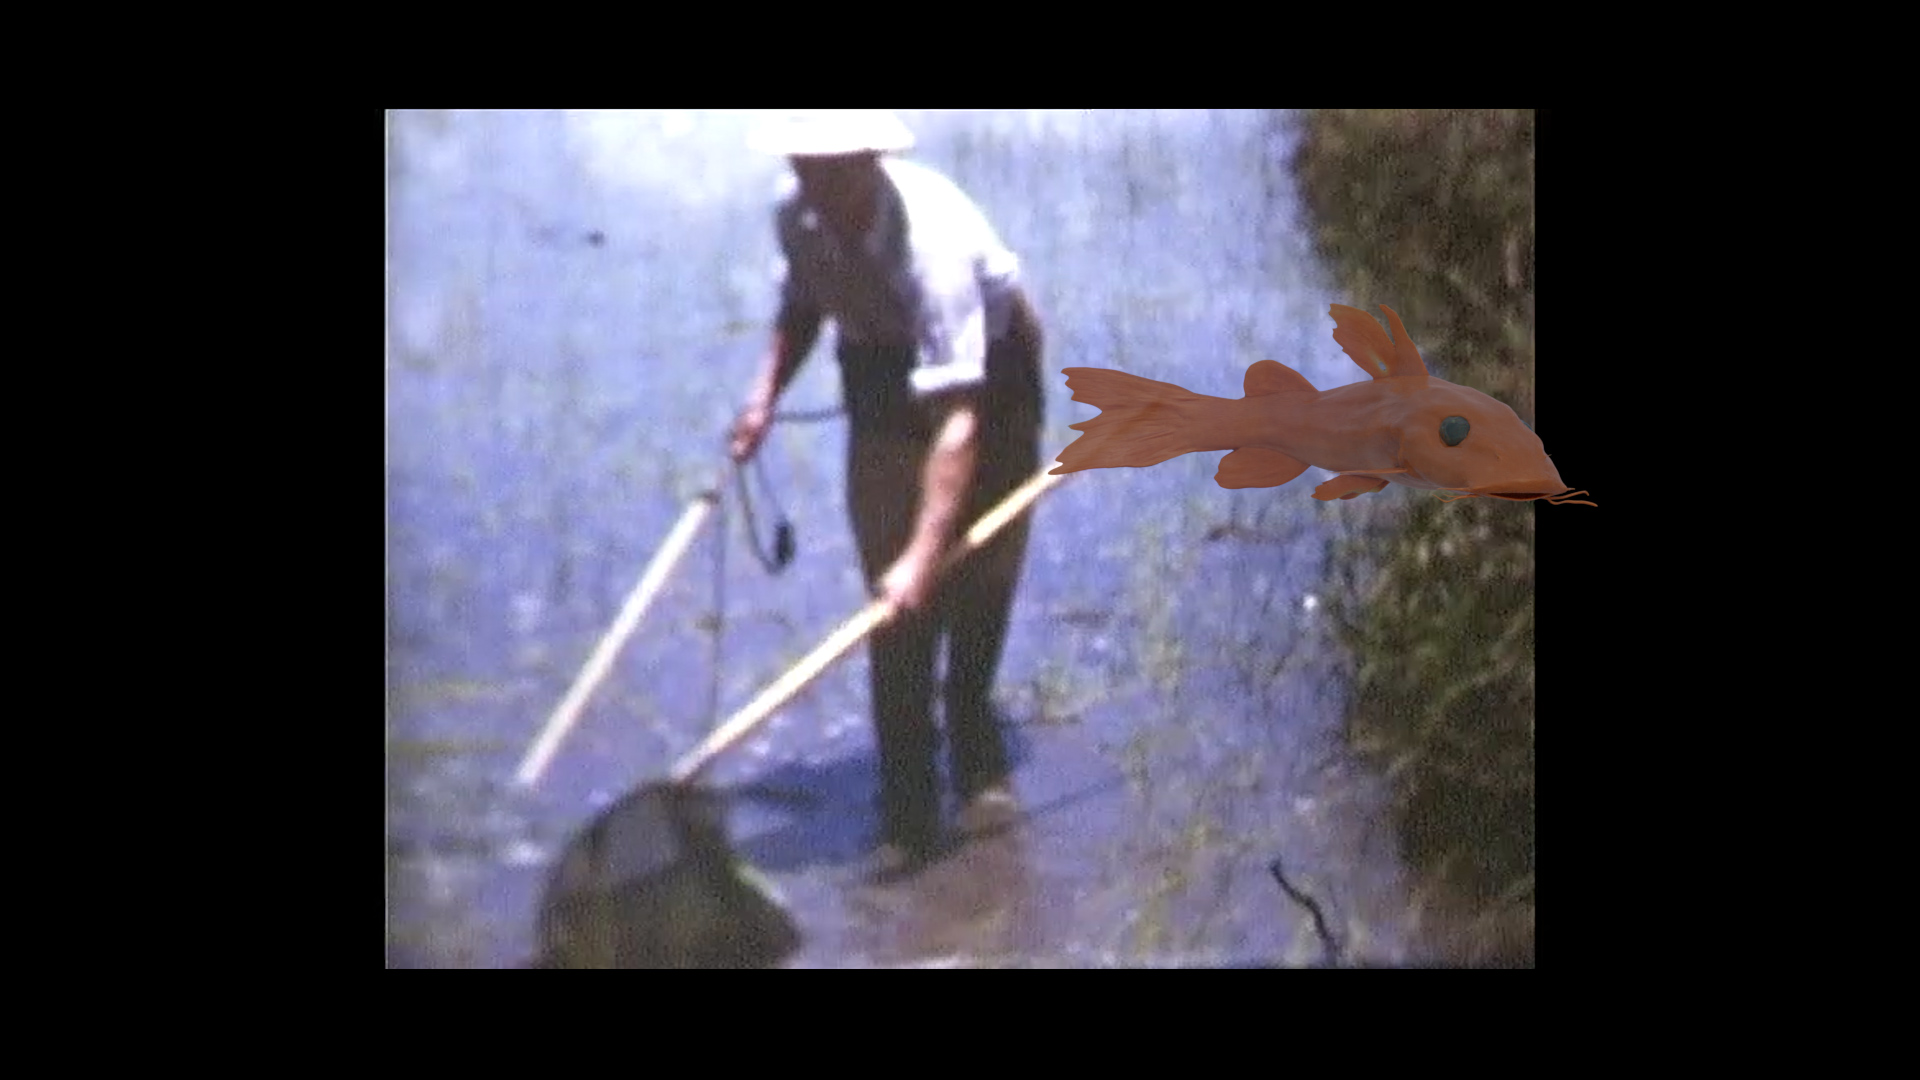 An image of a CGI fish swimming in front of a grainy found image of a fisherman.